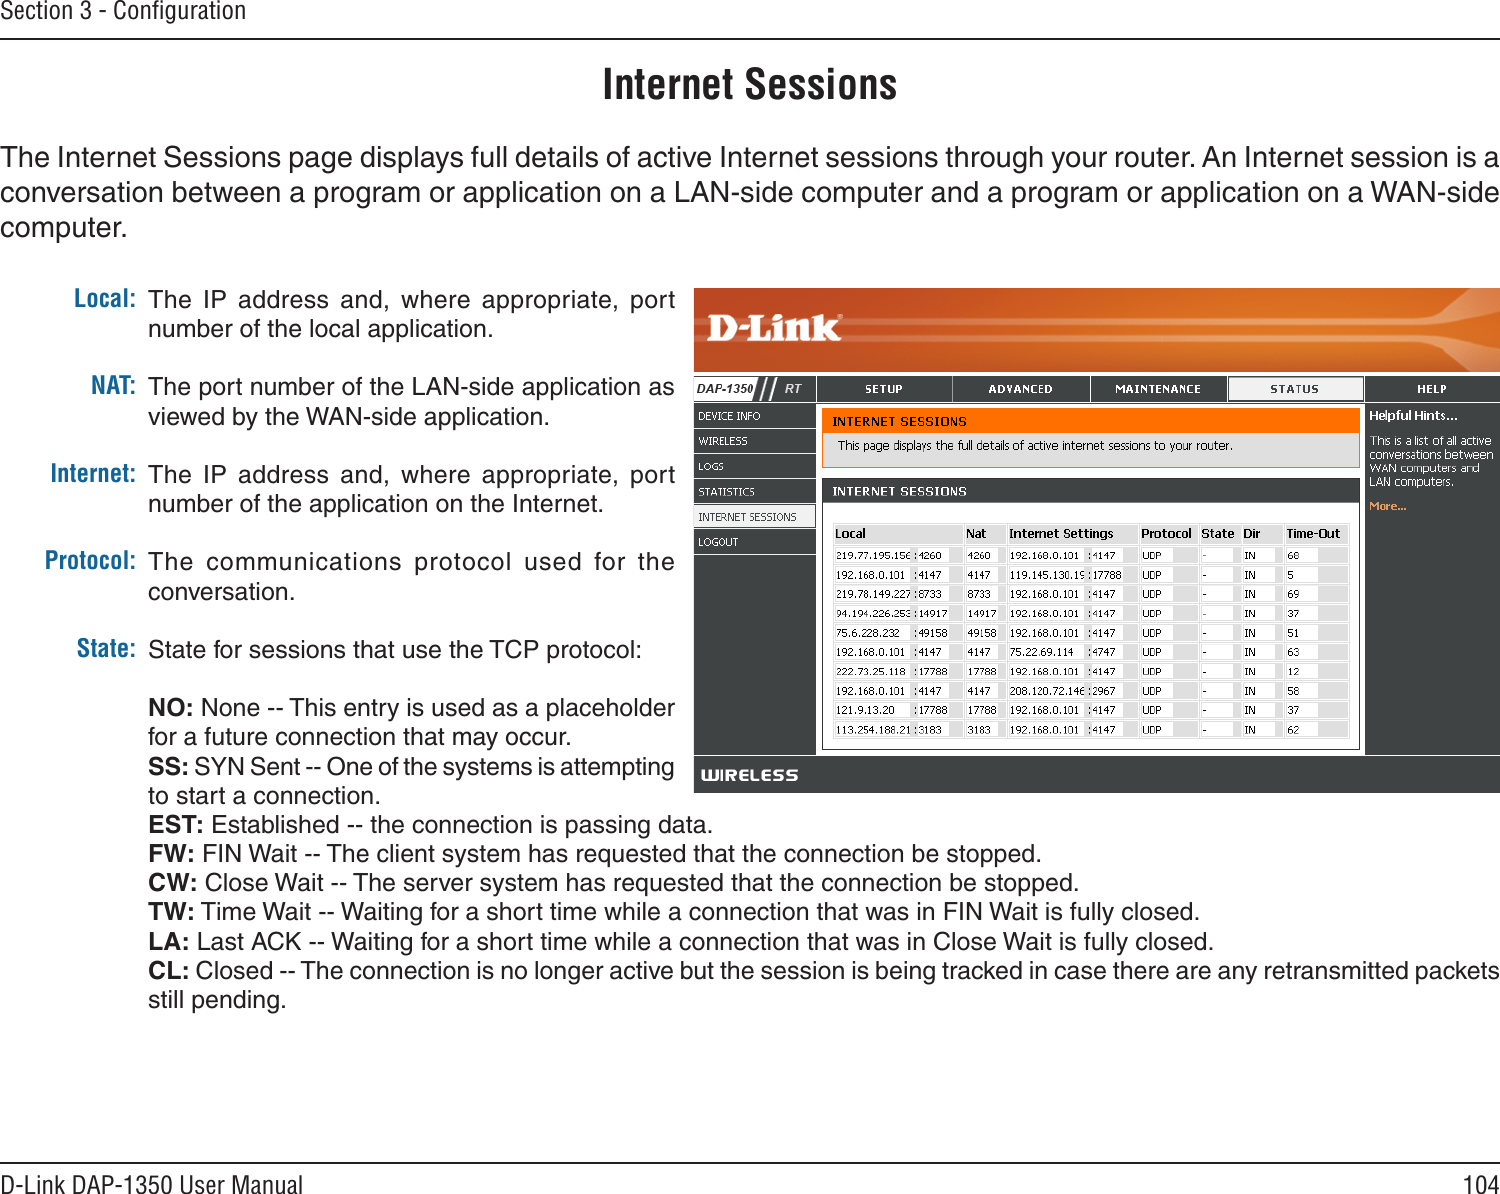 104D-Link DAP-1350 User ManualSection 3 - ConﬁgurationInternet SessionsThe Internet Sessions page displays full details of active Internet sessions through your router. An Internet session is a conversation between a program or application on a LAN-side computer and a program or application on a WAN-side computer. Local:NAT:Internet:Protocol:State:The  IP  address  and,  where  appropriate,  port number of the local application. The port number of the LAN-side application as viewed by the WAN-side application. The  IP  address  and,  where  appropriate,  port number of the application on the Internet. The  communications  protocol  used  for  the conversation. State for sessions that use the TCP protocol:NO: None -- This entry is used as a placeholder for a future connection that may occur.SS: SYN Sent -- One of the systems is attempting to start a connection.EST: Established -- the connection is passing data.FW: FIN Wait -- The client system has requested that the connection be stopped.CW: Close Wait -- The server system has requested that the connection be stopped.TW: Time Wait -- Waiting for a short time while a connection that was in FIN Wait is fully closed.LA: Last ACK -- Waiting for a short time while a connection that was in Close Wait is fully closed.CL: Closed -- The connection is no longer active but the session is being tracked in case there are any retransmitted packets still pending.